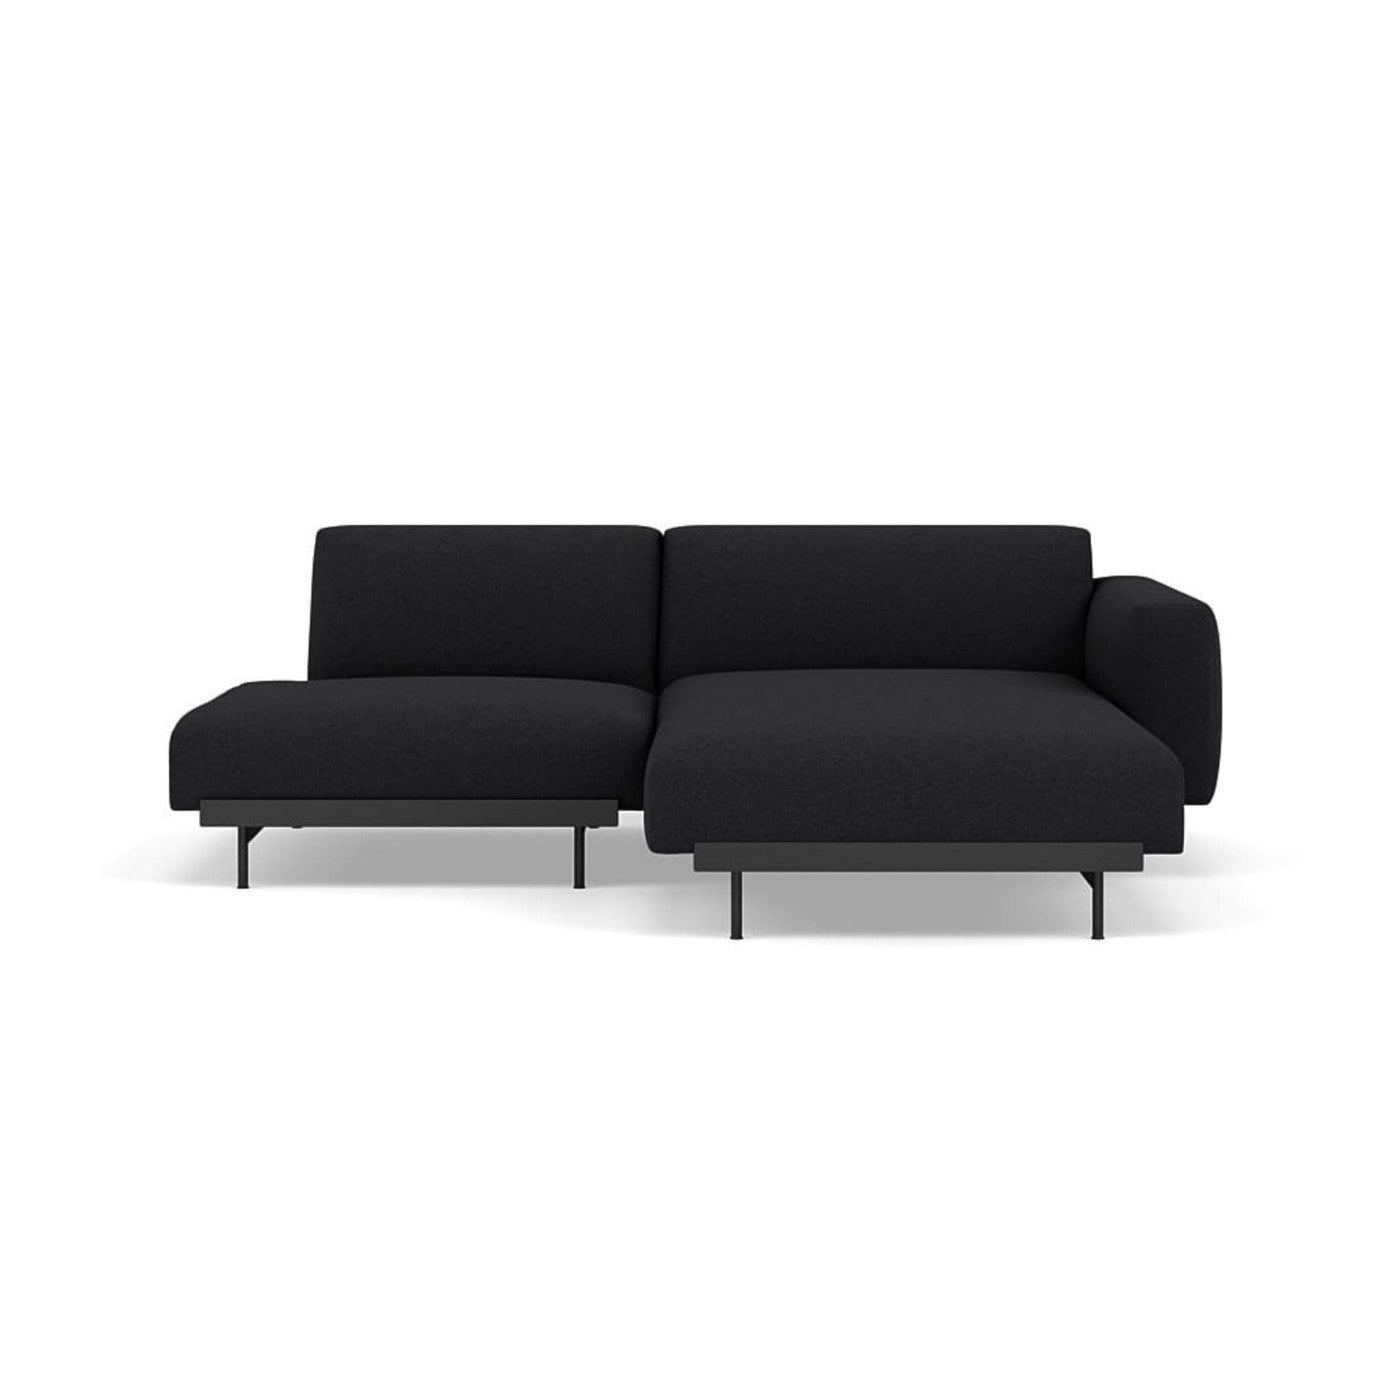 Muuto In Situ 2 Seater sofa in configuration 7. Made to order from someday designs. #colour_divina-md-193